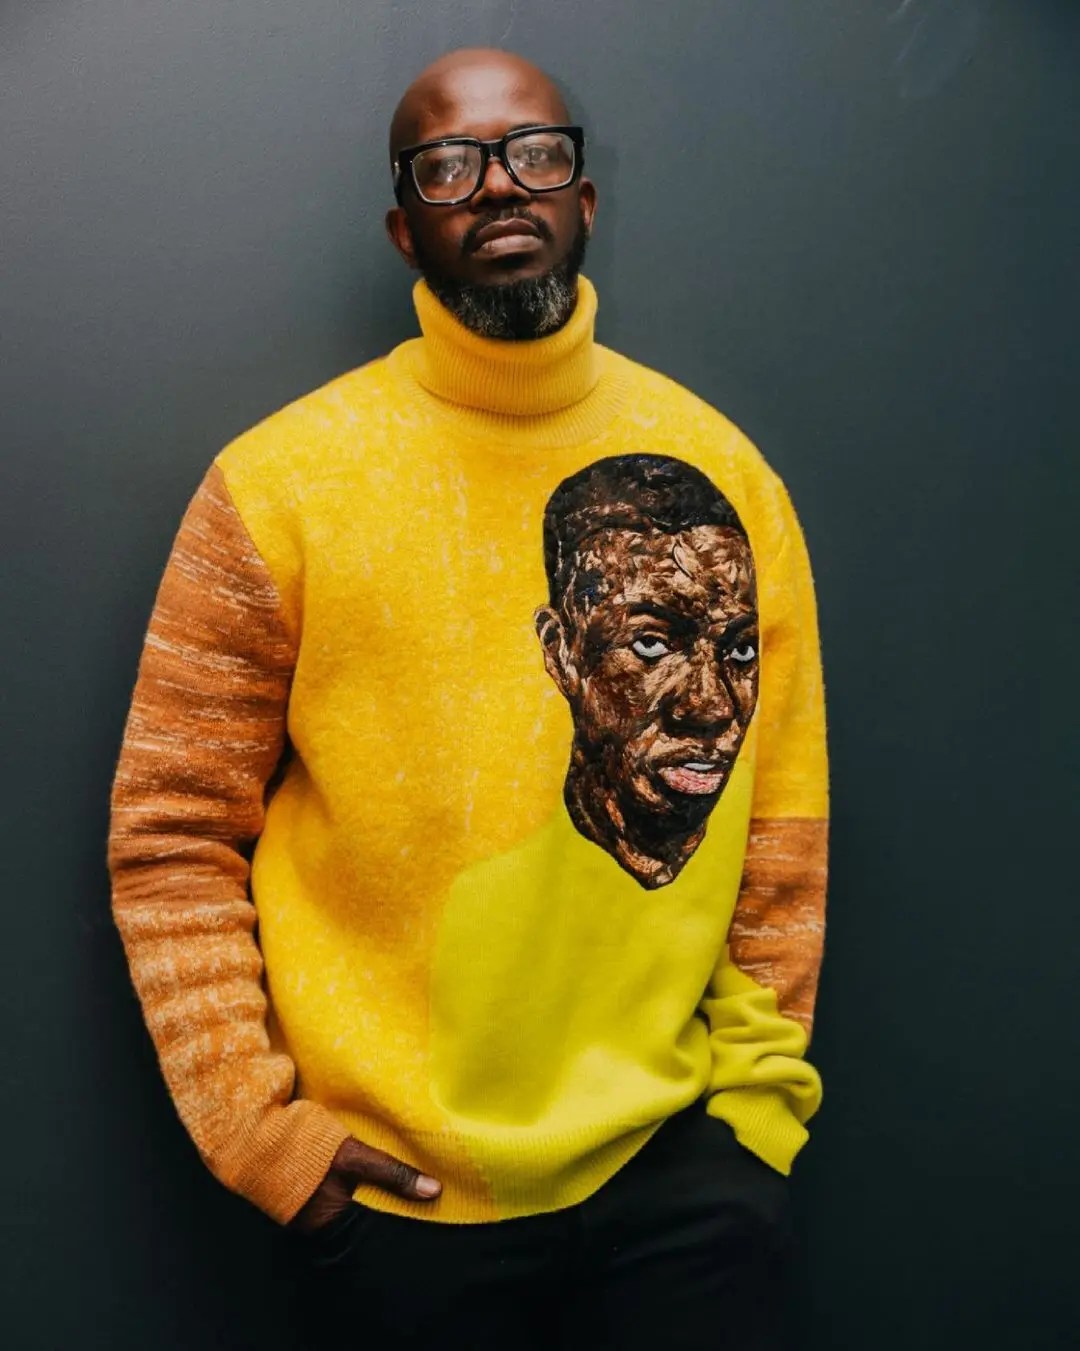 Black Coffee meets his twin brother – VIDEO